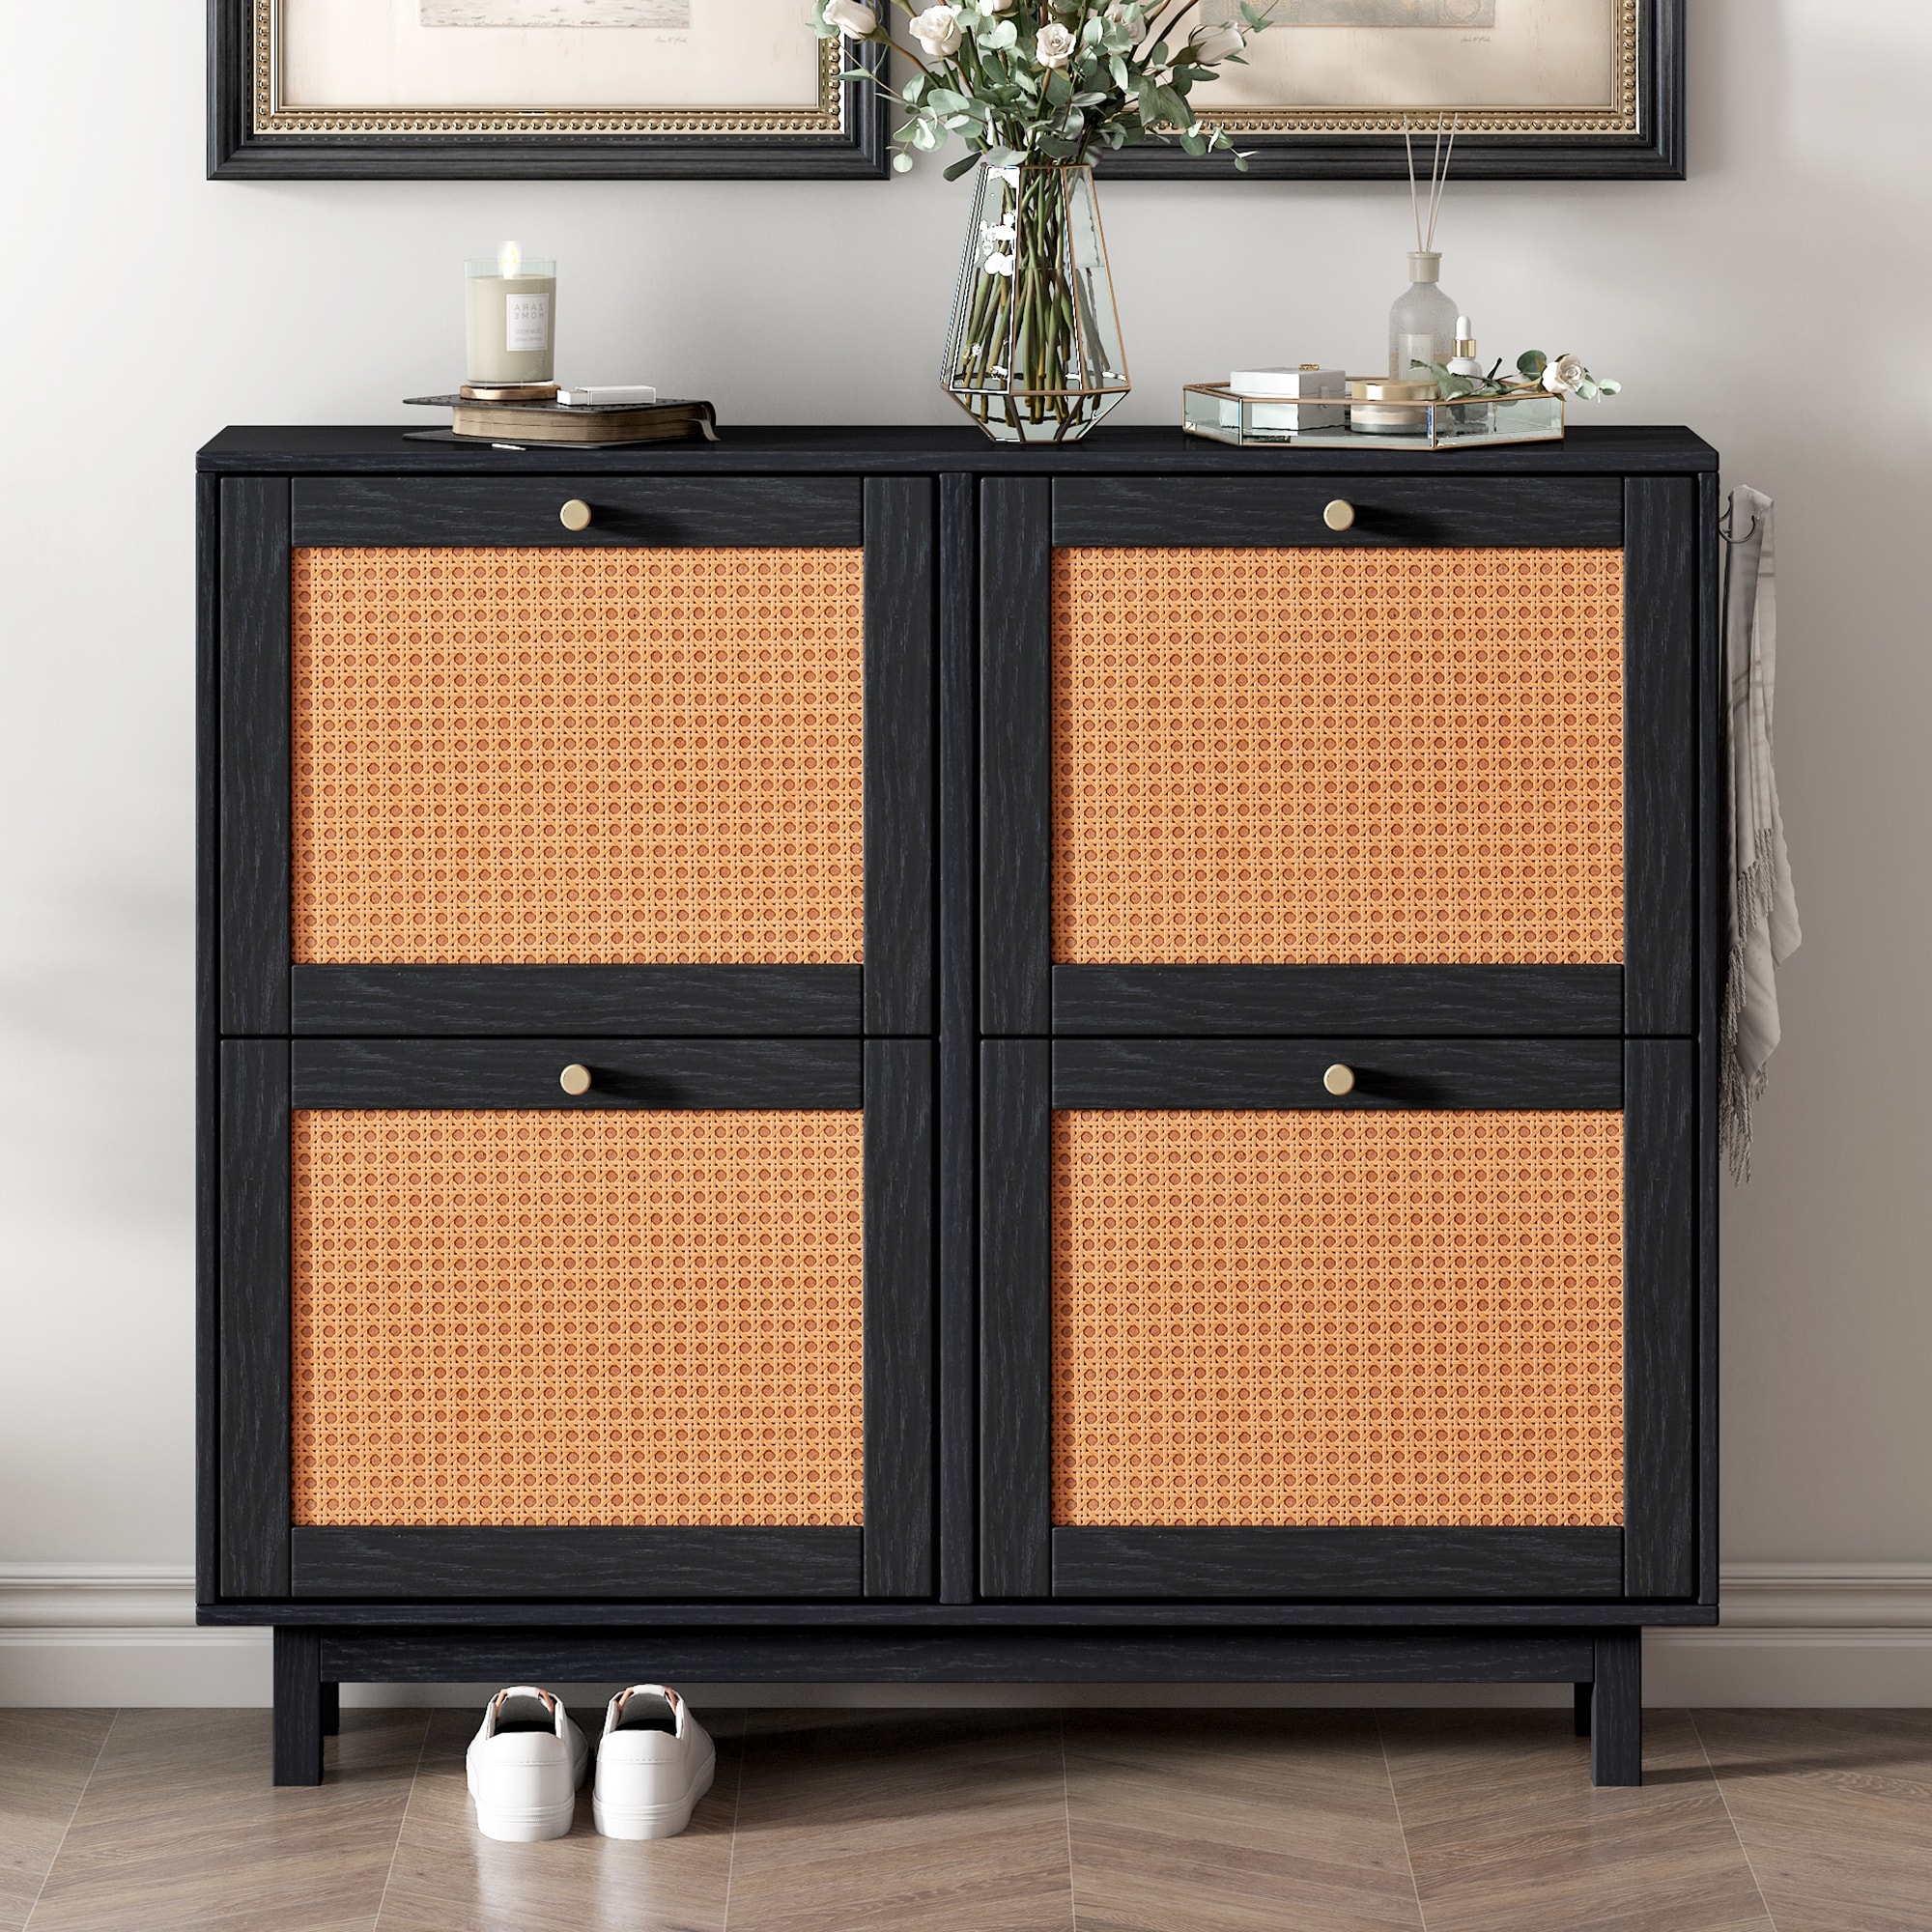 https://ak1.ostkcdn.com/images/products/is/images/direct/68640c823e0709b86418282ad44b3969ee9dcfff/Rattan-Shoe-Cabinet-with-4-Flip-Drawers%2C-Modern-2-Tier-Shoe-Storage-Organizer-with-Large-Space%2C-Free-Standing-Shoe-Rack.jpg